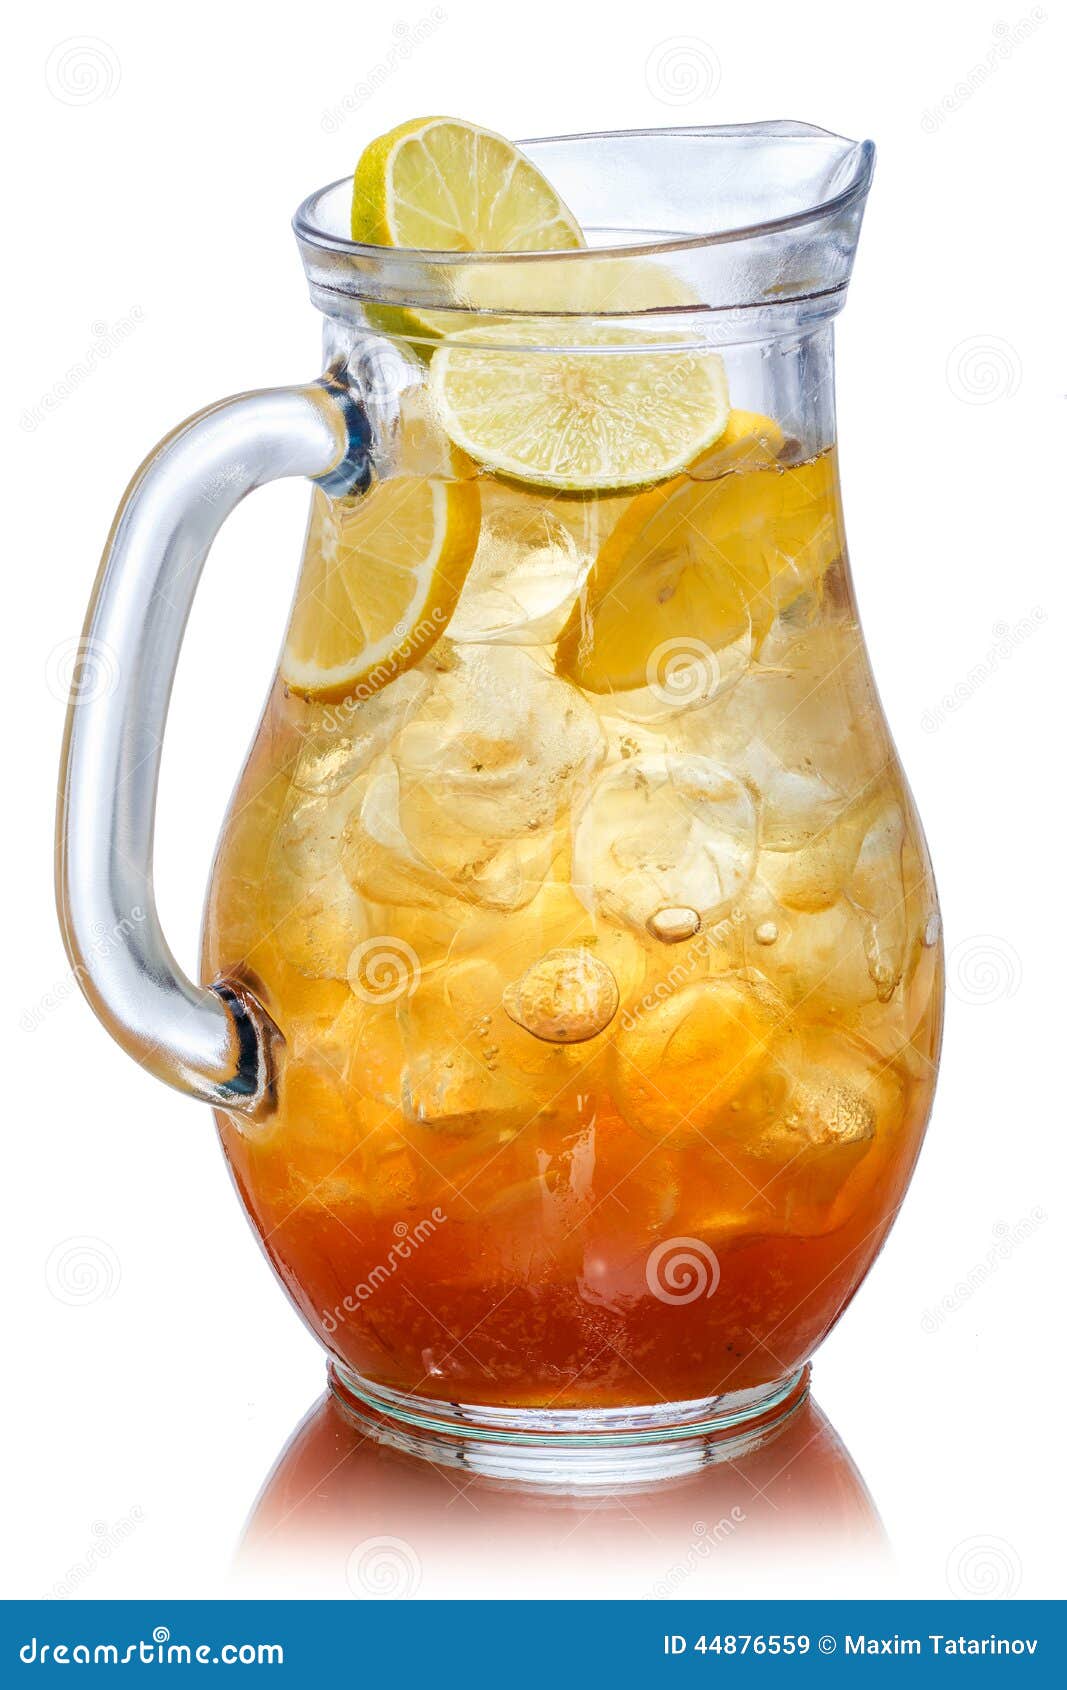 Iced tea in the pitcher stock image. Image of liquid - 44876559